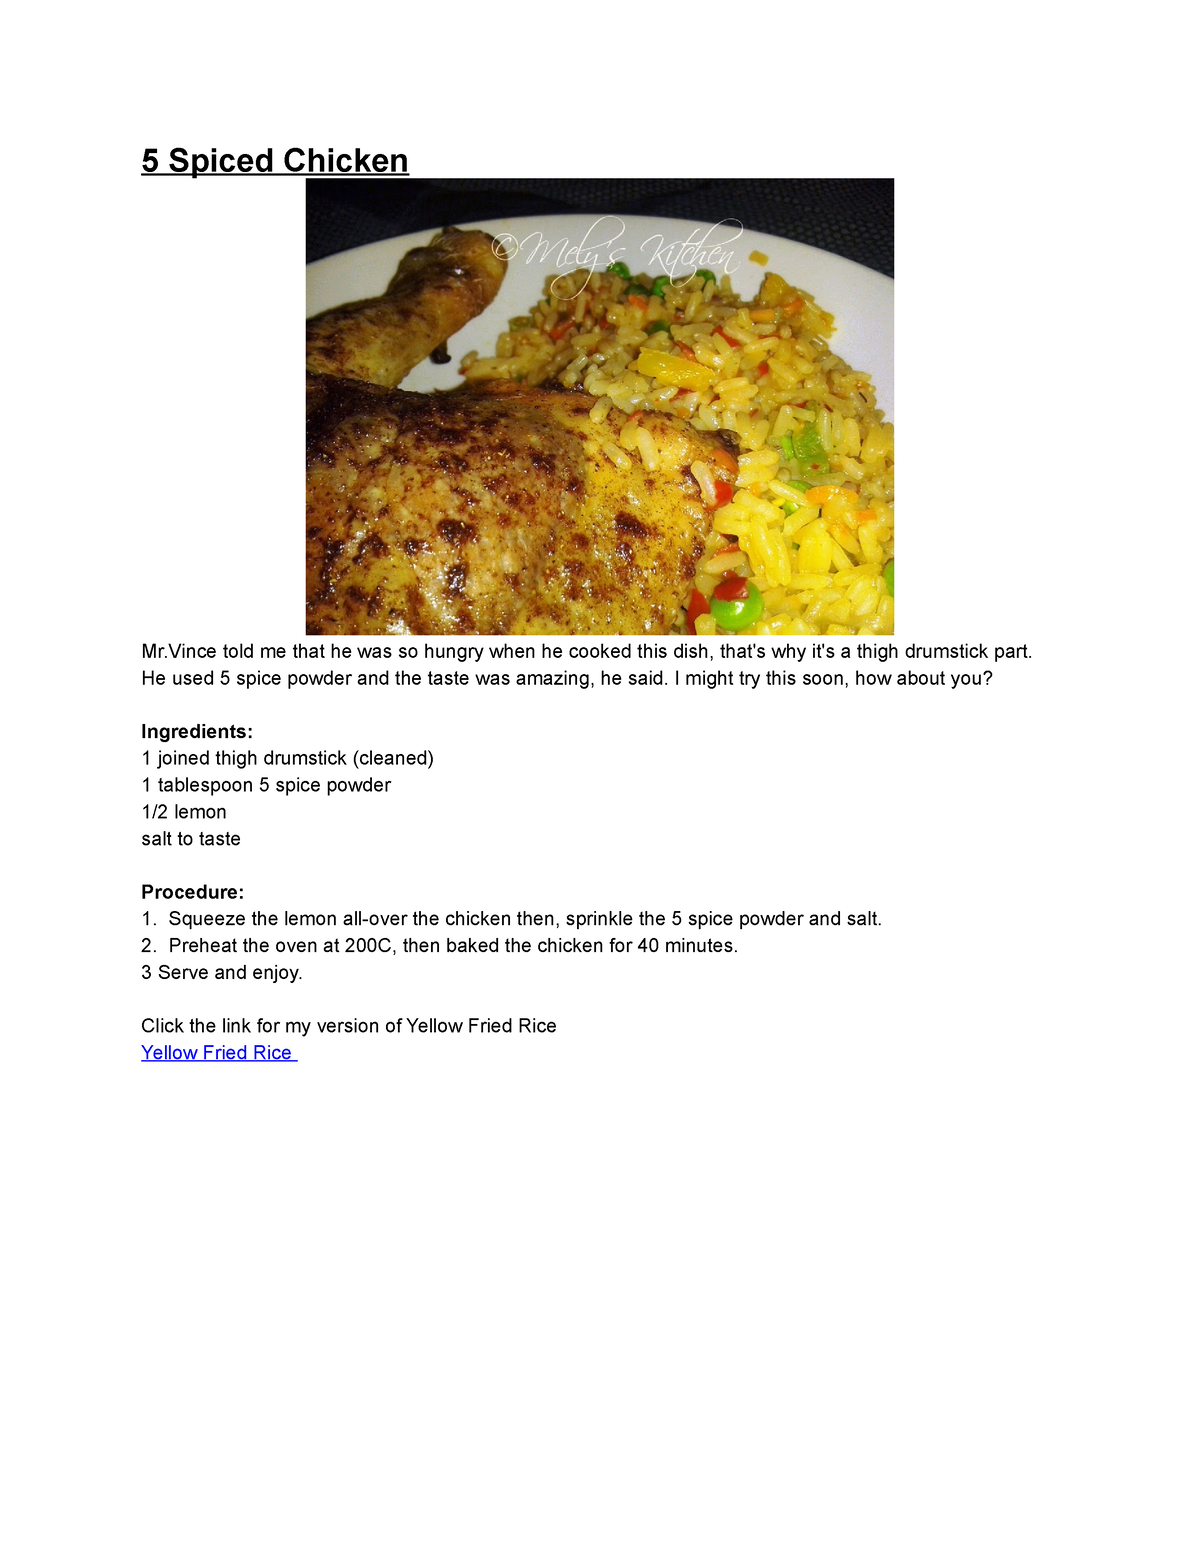 5 Spiced Chicken - Recipe - 5 Spiced Chicken Mr told me that he was so ...